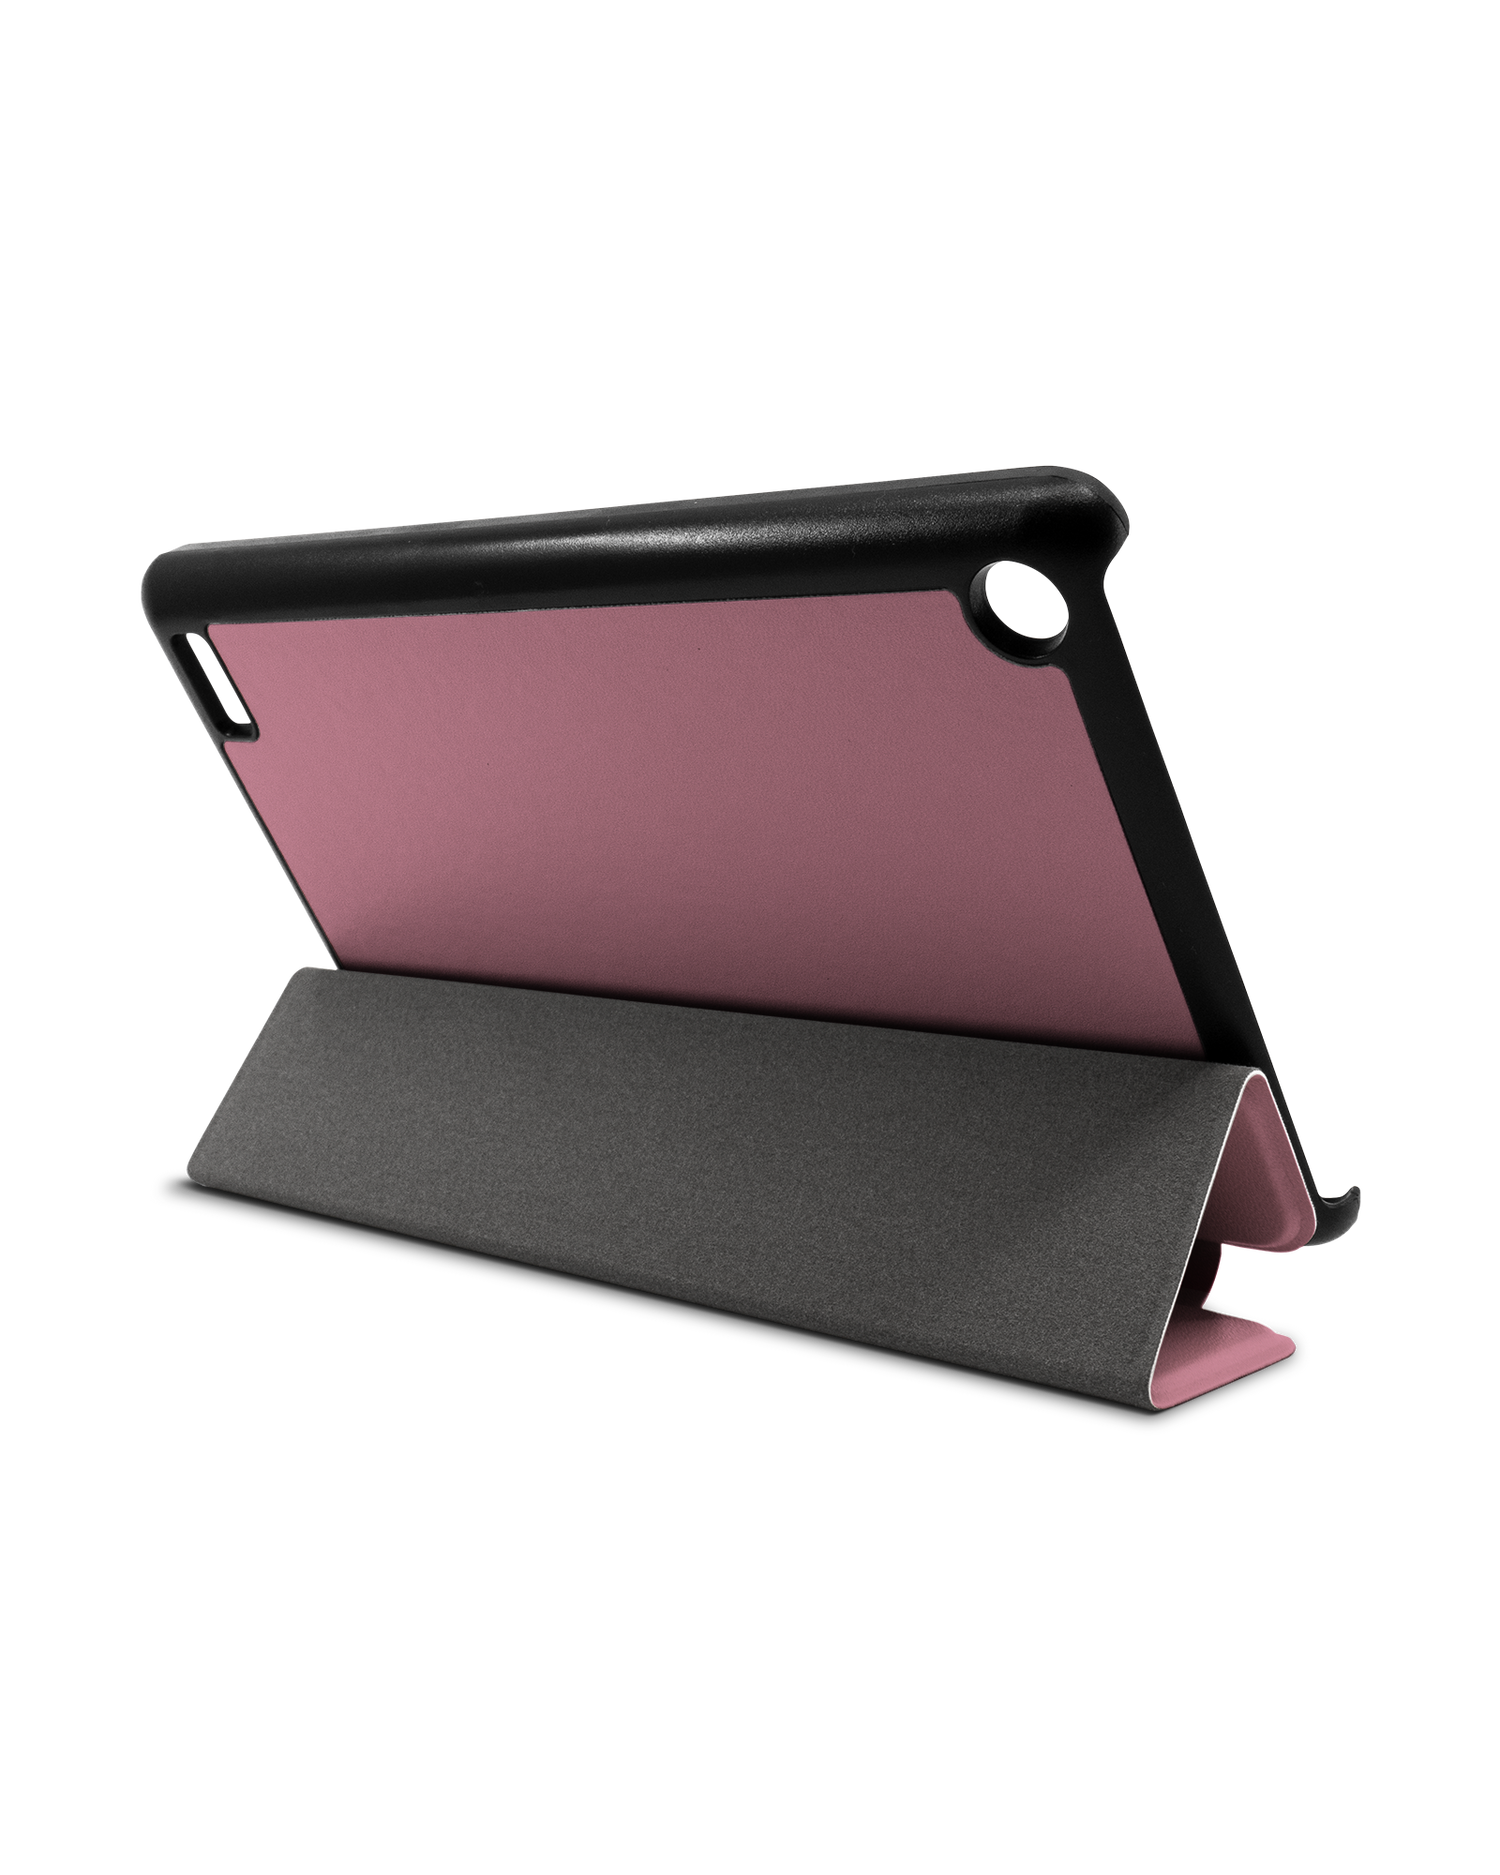 WILD ROSE Tablet Smart Case for Amazon Fire 7: Used as Stand